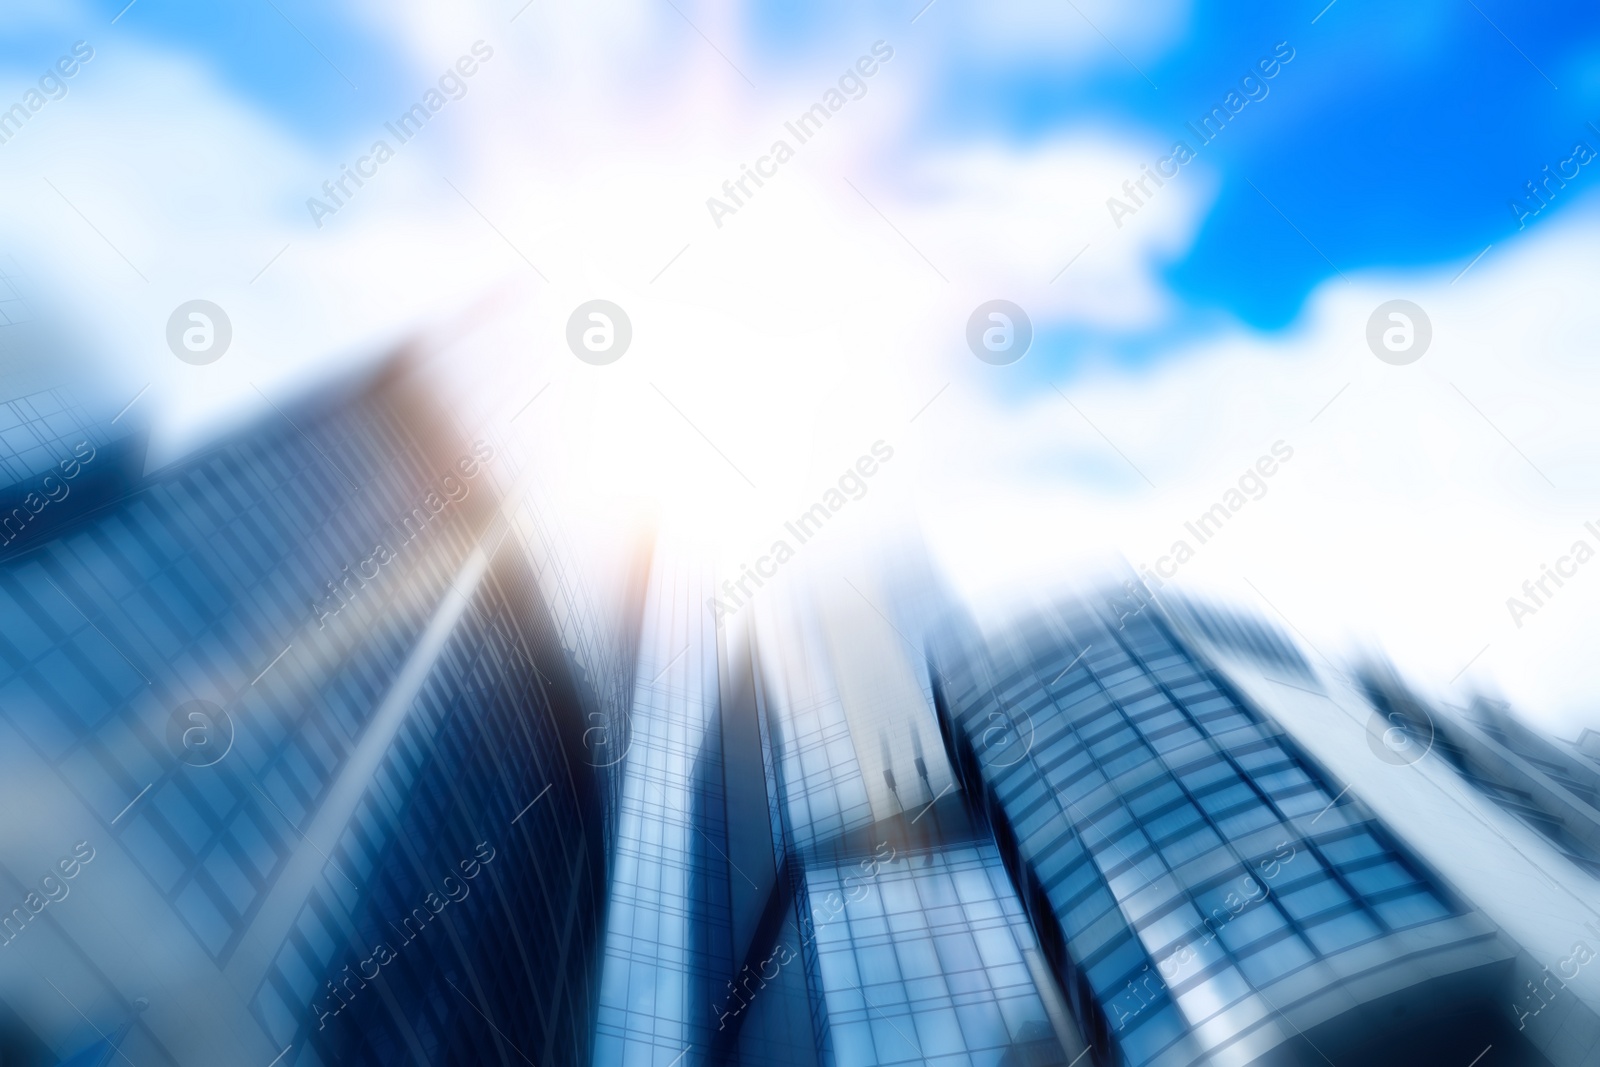 Image of Blurred view of modern skyscraper with tinted windows against blue sky, low angle view. Building corporation